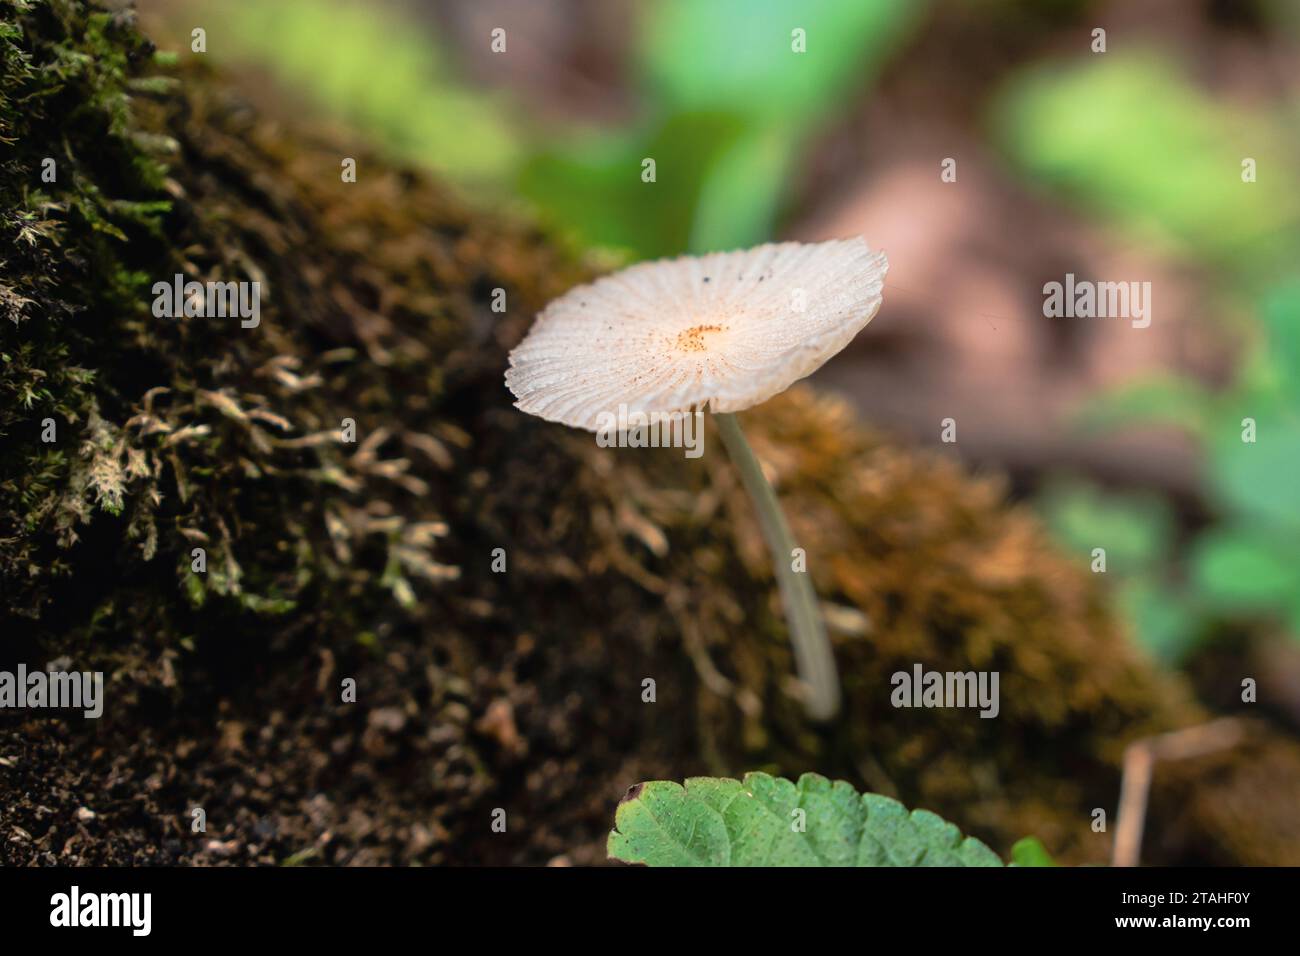 mushroom growing on the mossy bark of a tree in a rainforest Stock Photo